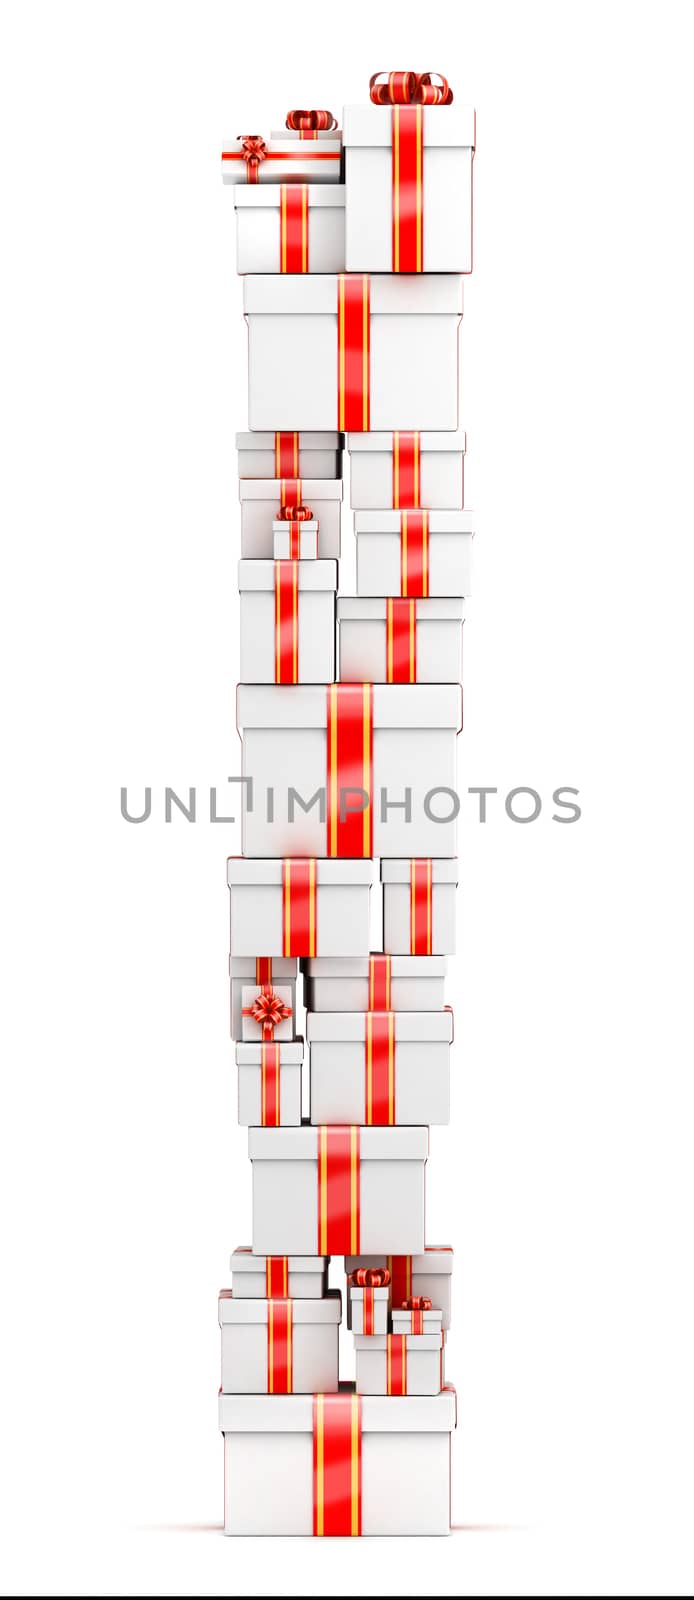 Tall tower of gift boxes - white gift boxes staked